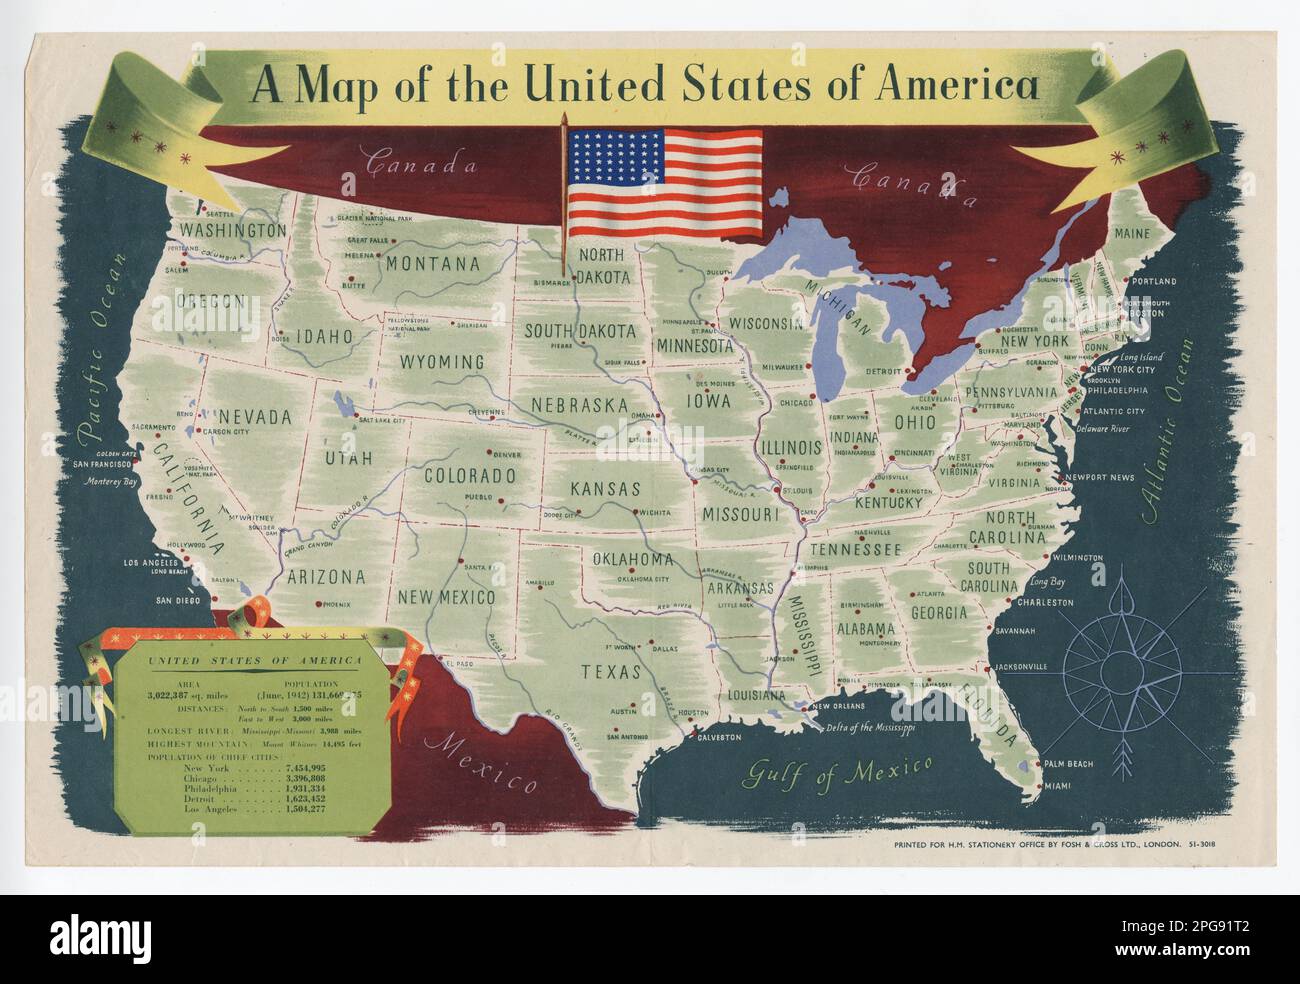 A Map of the United States of America. Country: UK Printed By: Fosh & Cross Ltd.. 1942 - 1945.  Office for Emergency Management. Office of War Information. Domestic Operations Branch. Bureau of Special Services. 3/9/1943-9/15/1945. World War II Foreign Posters Stock Photo